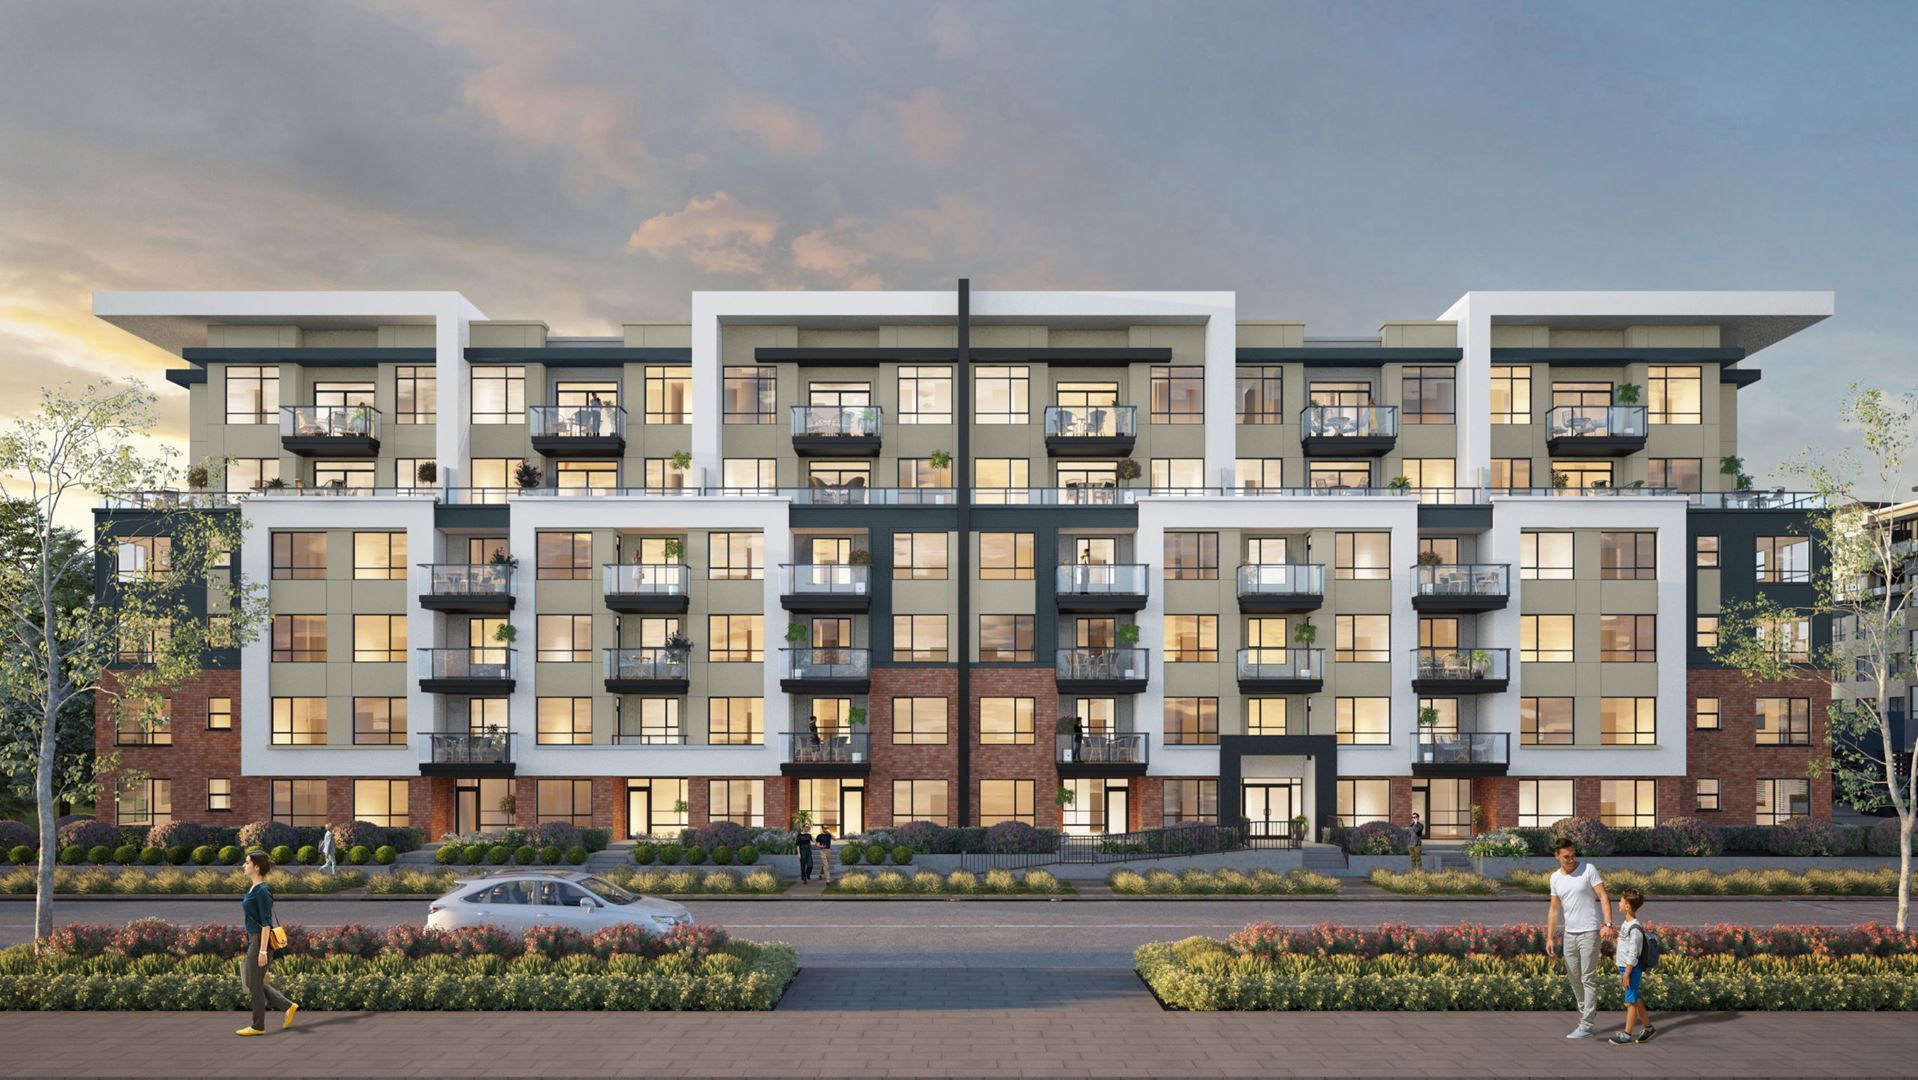 Main Photo:  in : Willoughby Heights Condo for sale (Langley)  : MLS®# Presale